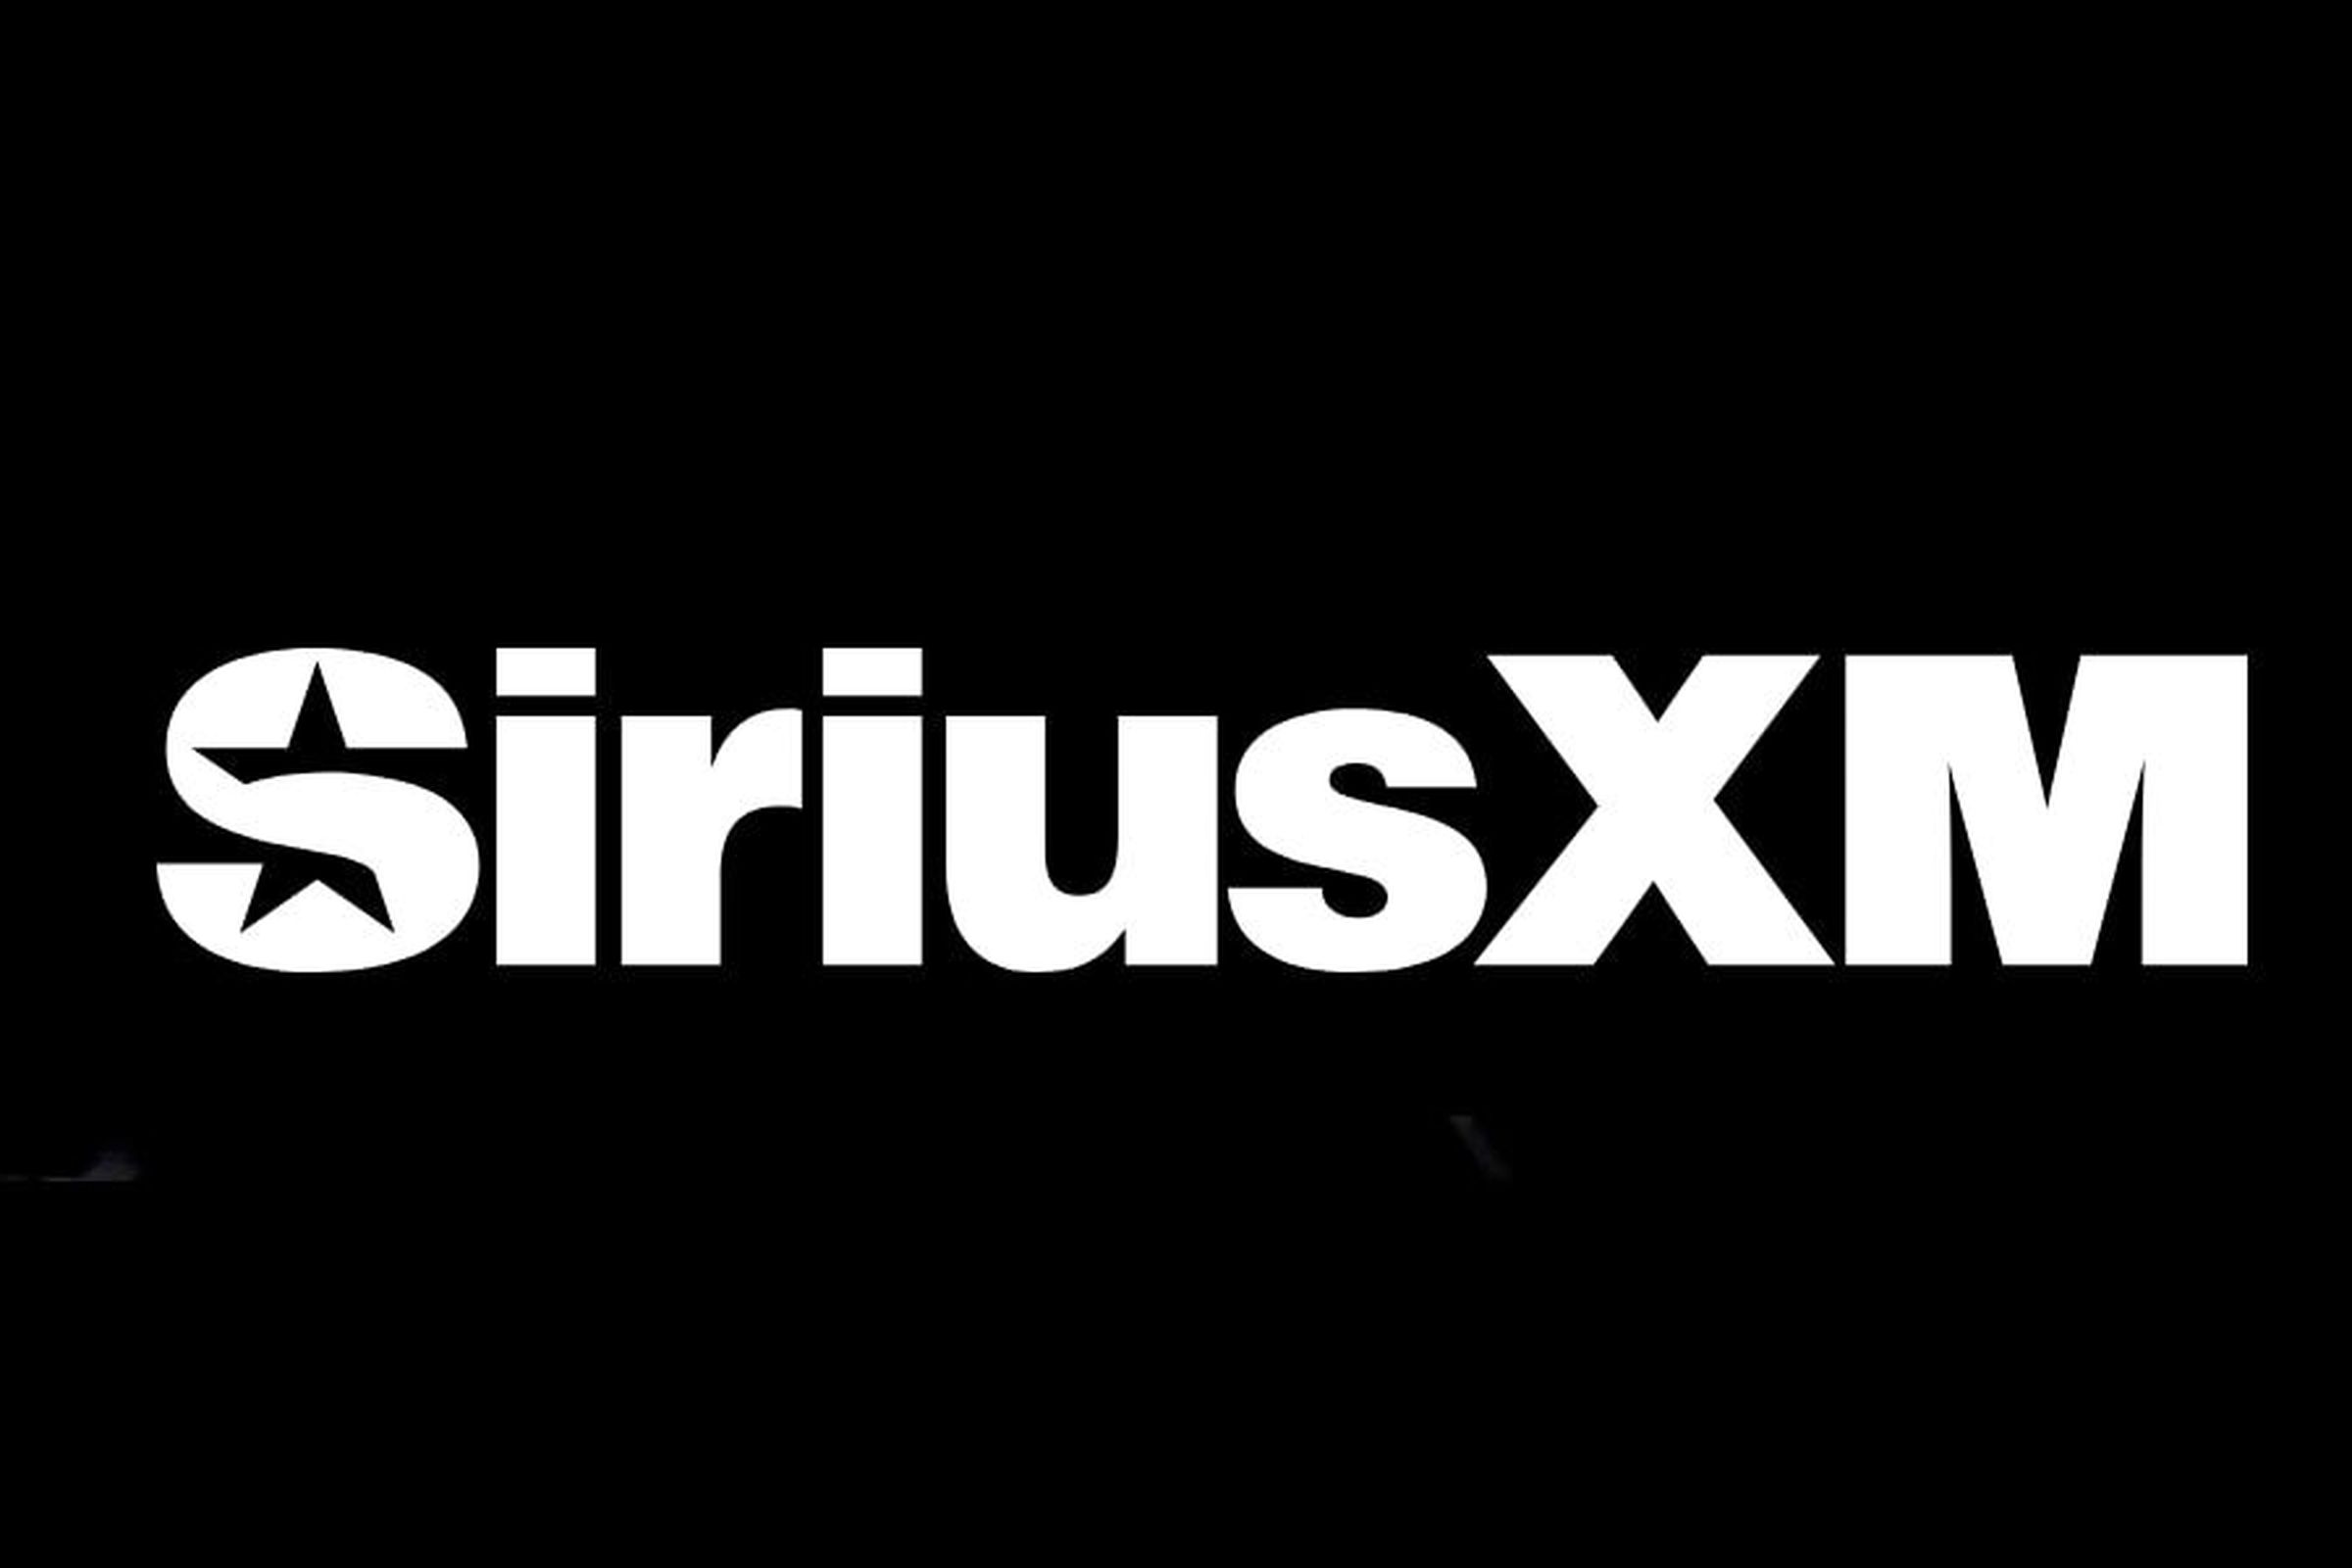 It says “SiriusXM” with a star hollowed out inside the first S.